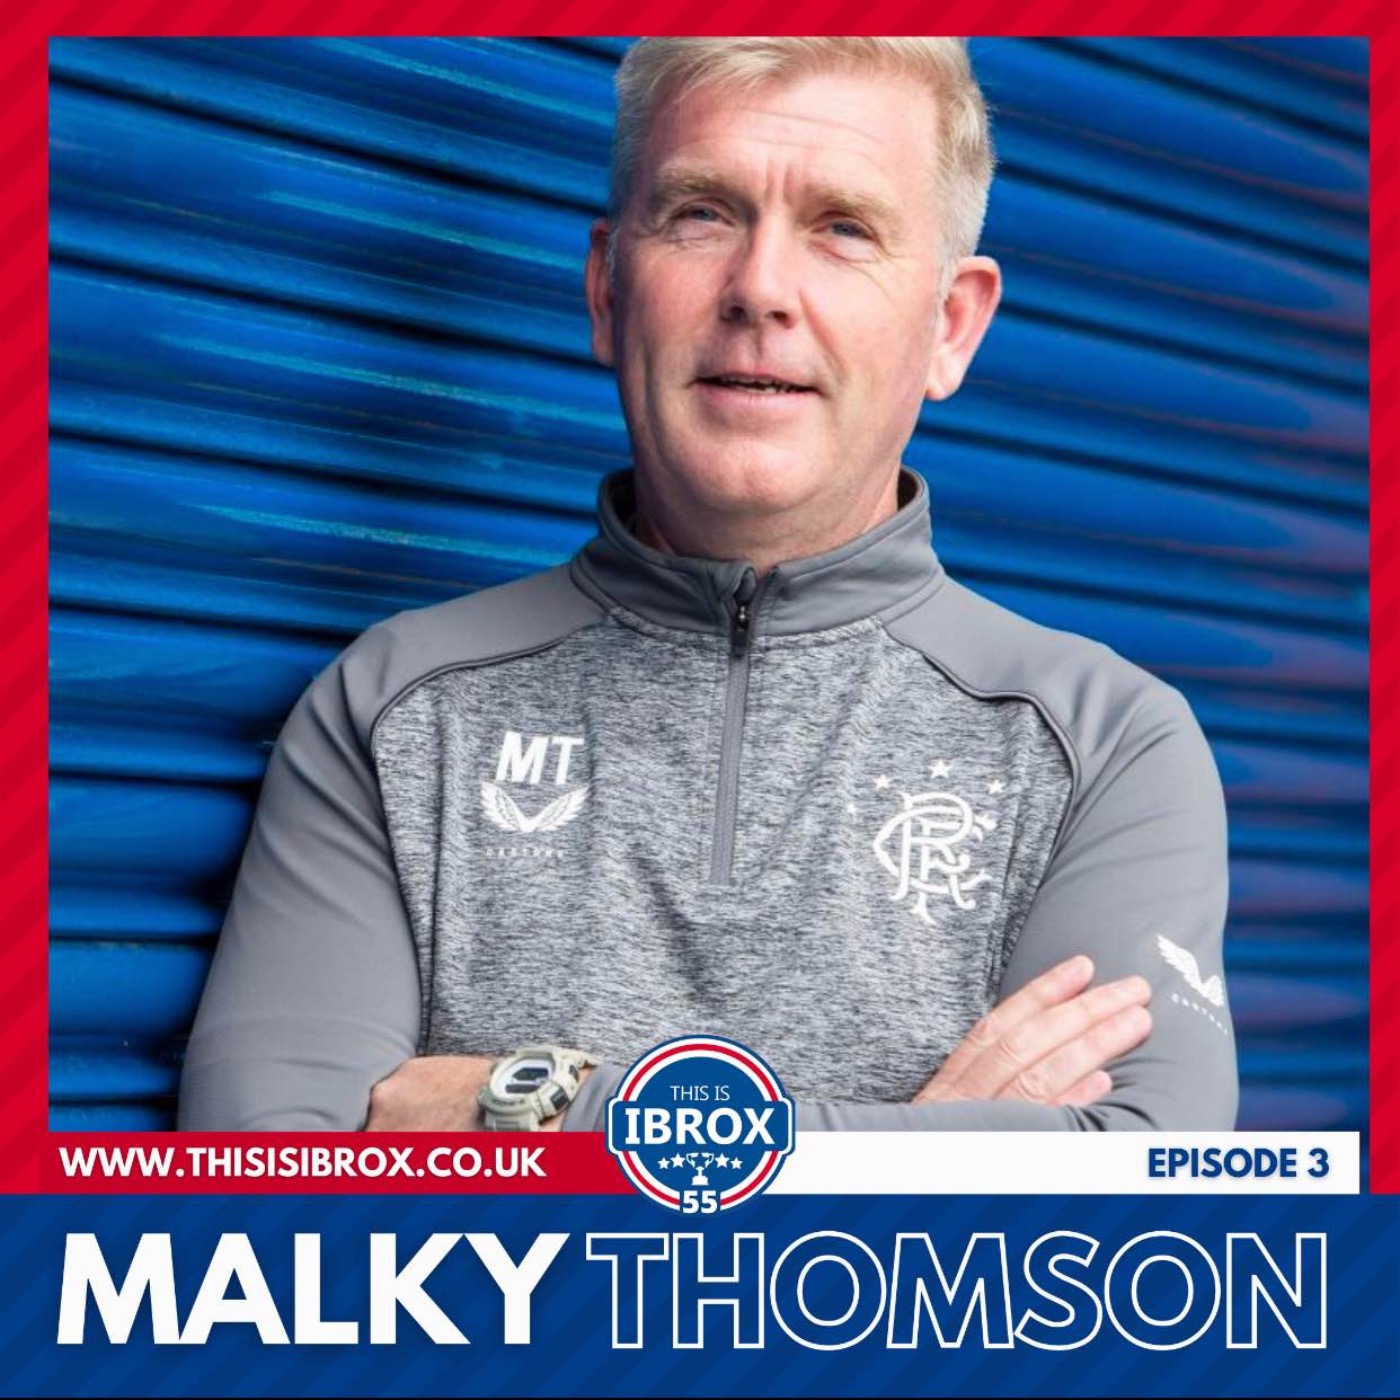 Malky Thomson - The Women’s Football Podcast